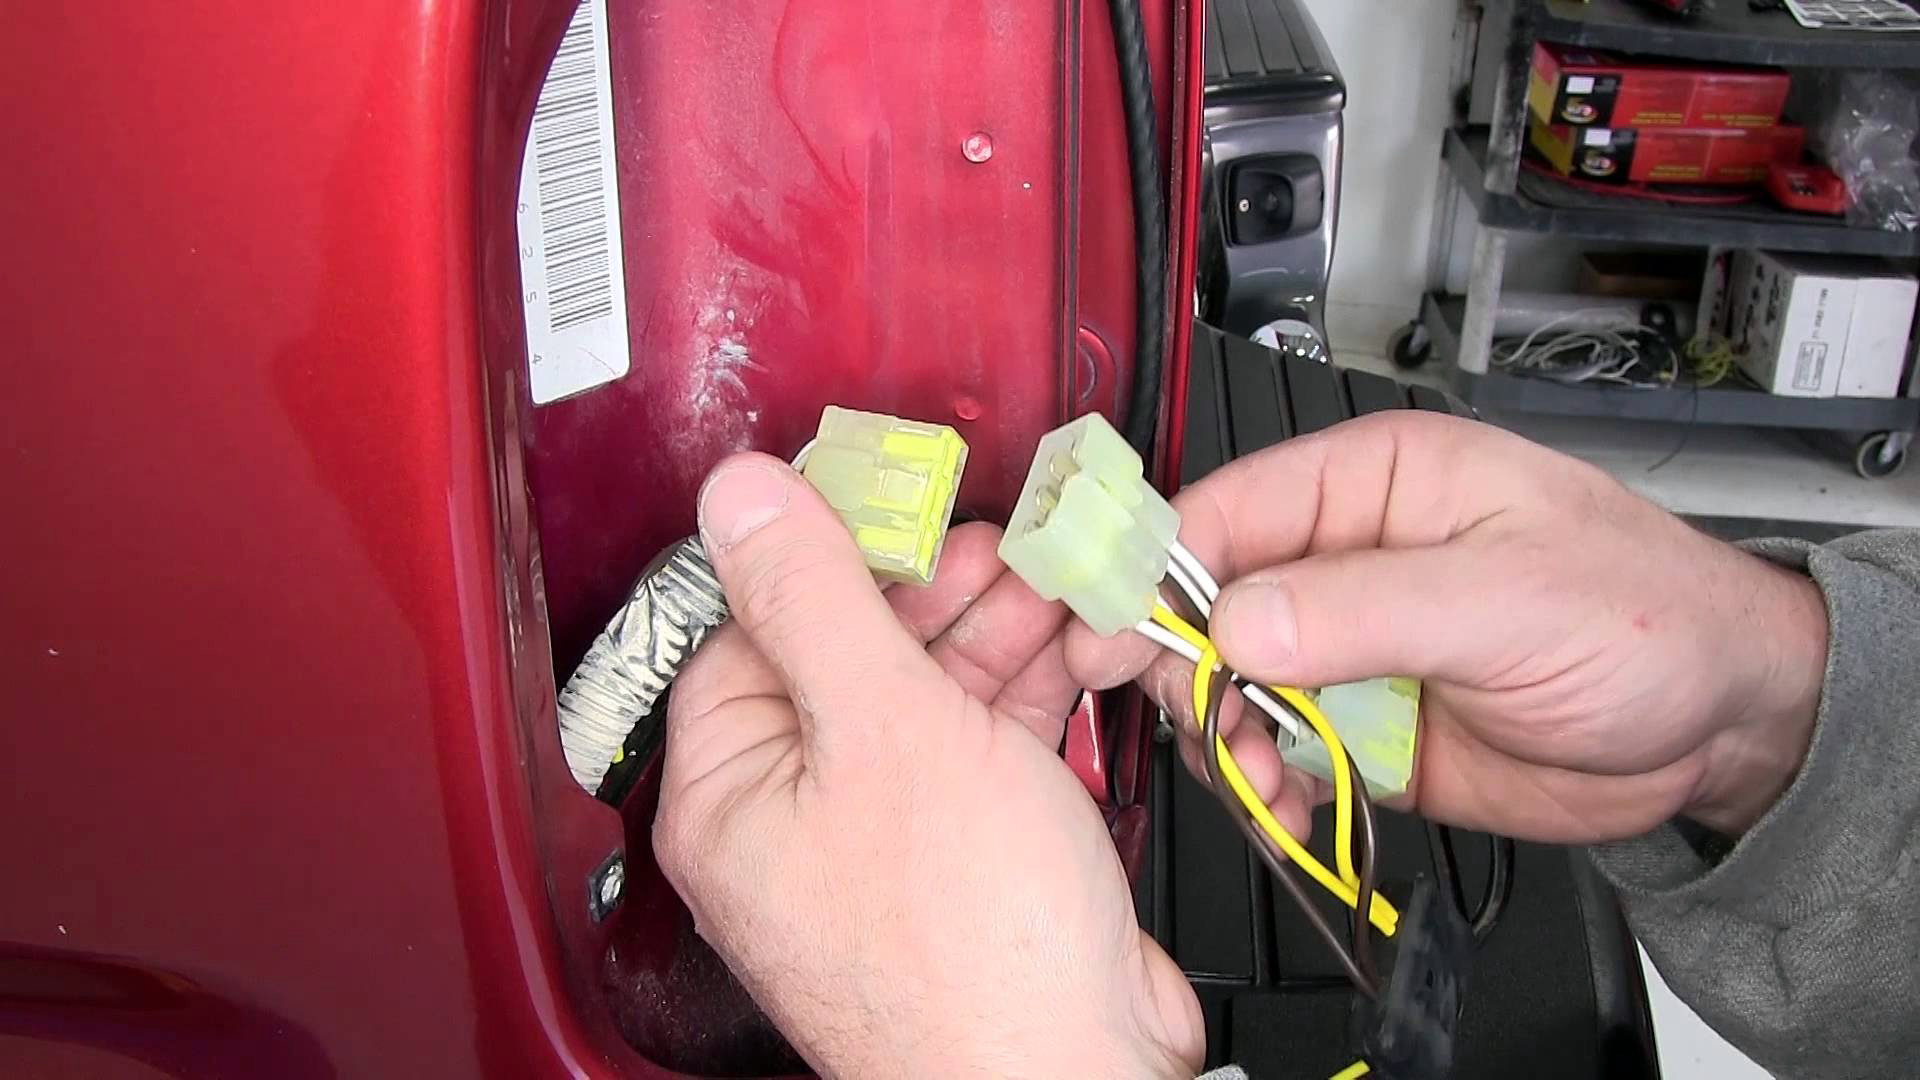 Toyota Tacoma: How to Install Trailer Wiring Harness | Yotatech